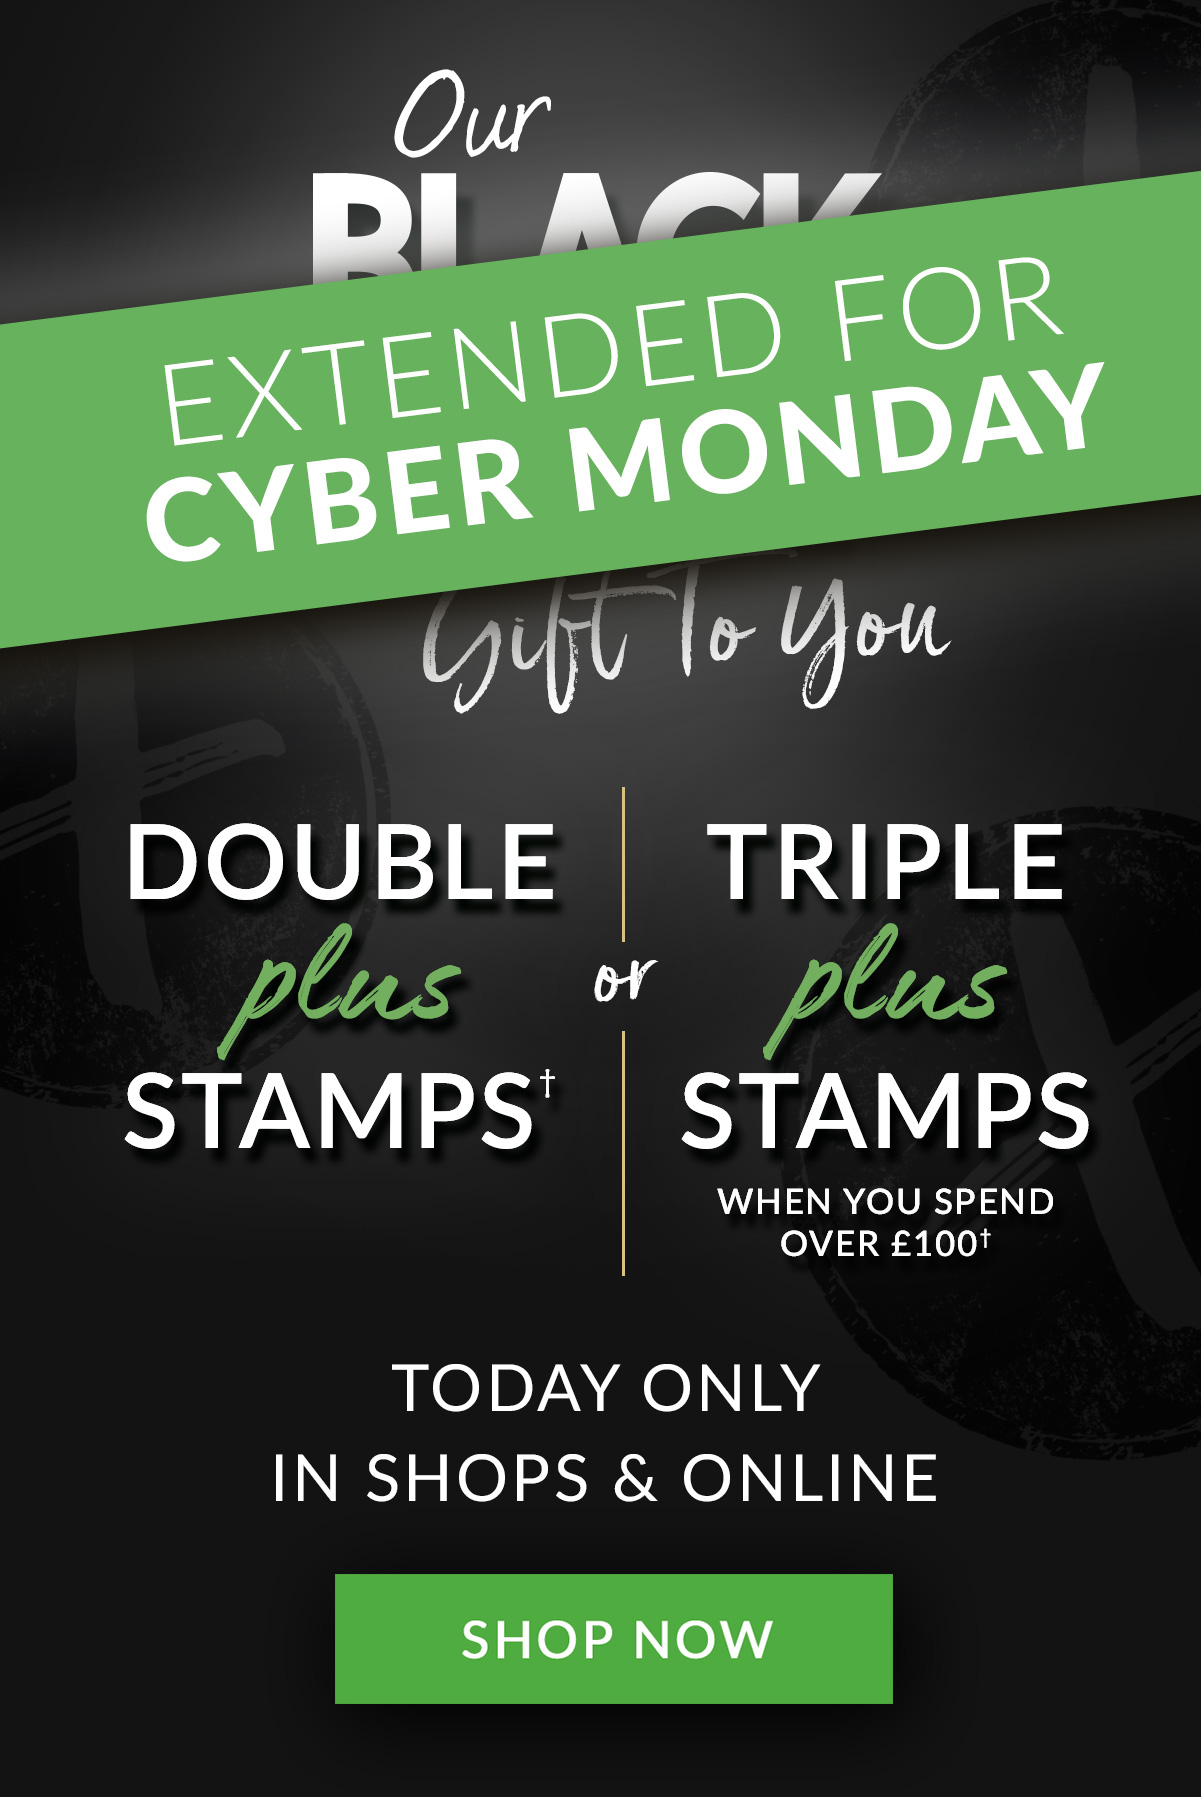 EXTENDED FOR CYBER MONDAY | Double Plus Stamps† or Triple Plus Stamps when you spend over £100† | TODAY ONLY | IN SHOPS & ONLINE | SHOP NOW DOIWAII OR BN RNl L VR i DOUBLE TRIPLE STAMPS' STAMPS WHEN YOU SPEND TODAY ONLY IN SHOPS ONLINE SHOP NOW 